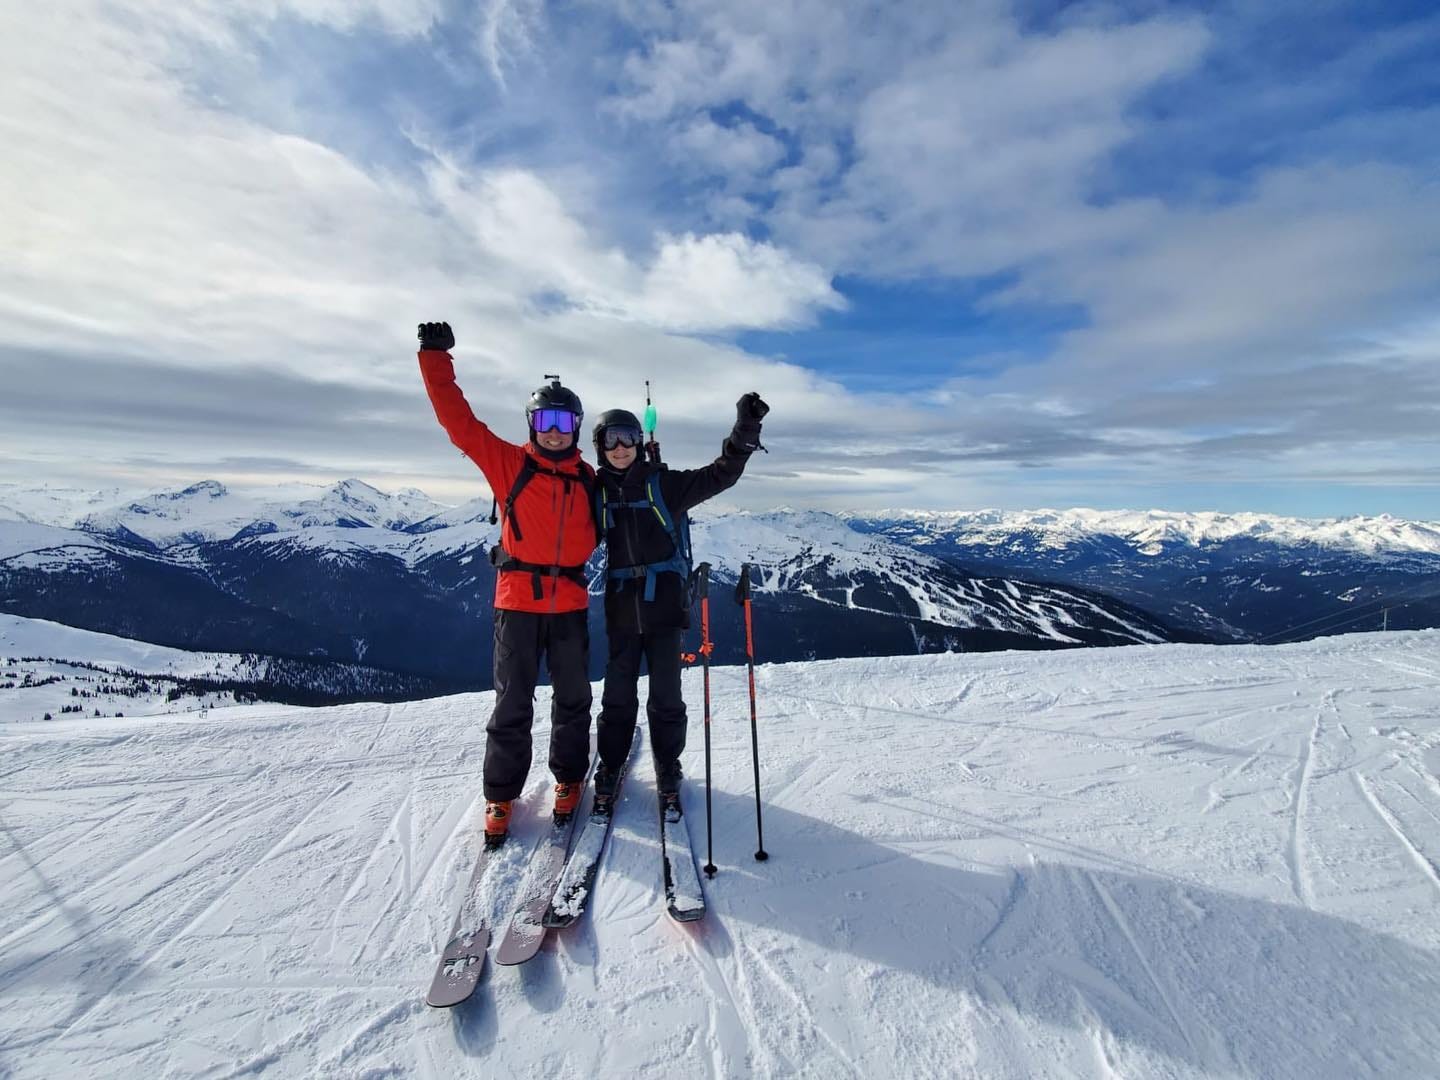 May be an image of 2 people, people standing, people skiing and nature